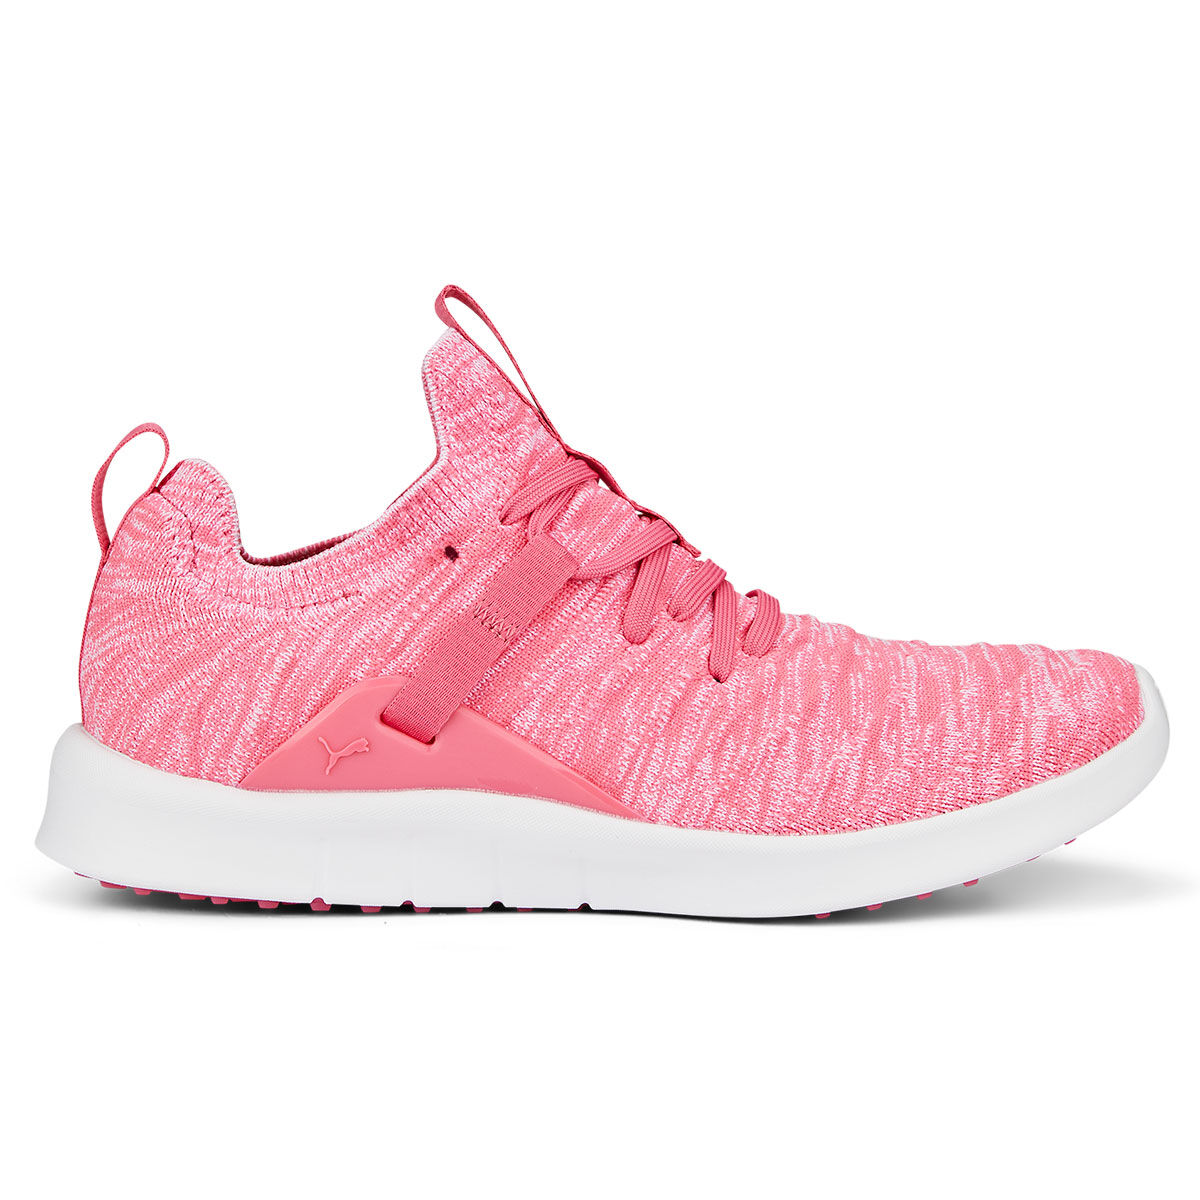 PUMA Golf Women’s Pink and White Knitted PUMA Laguna Fusion Knit Spikeless Golf Shoes, Size: 6 | American Golf